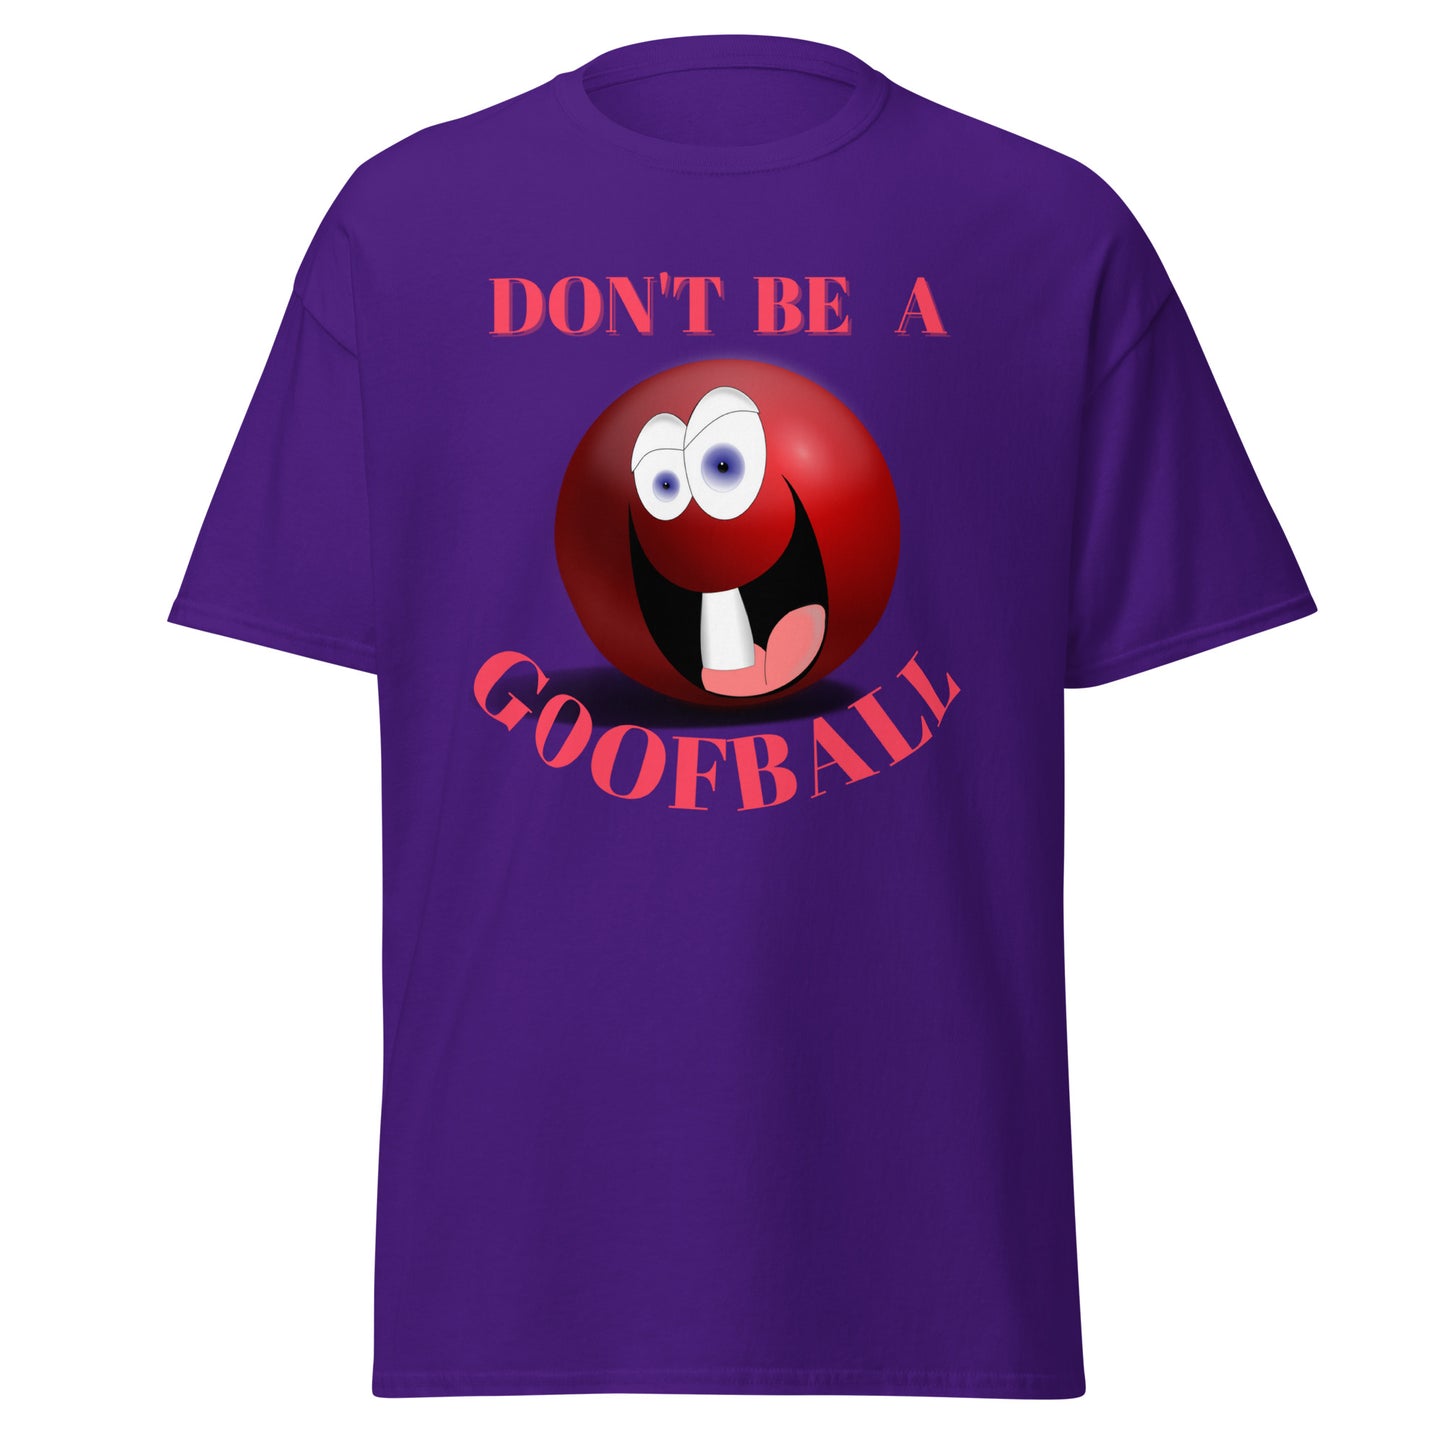 Don't be a Goofball (purple)